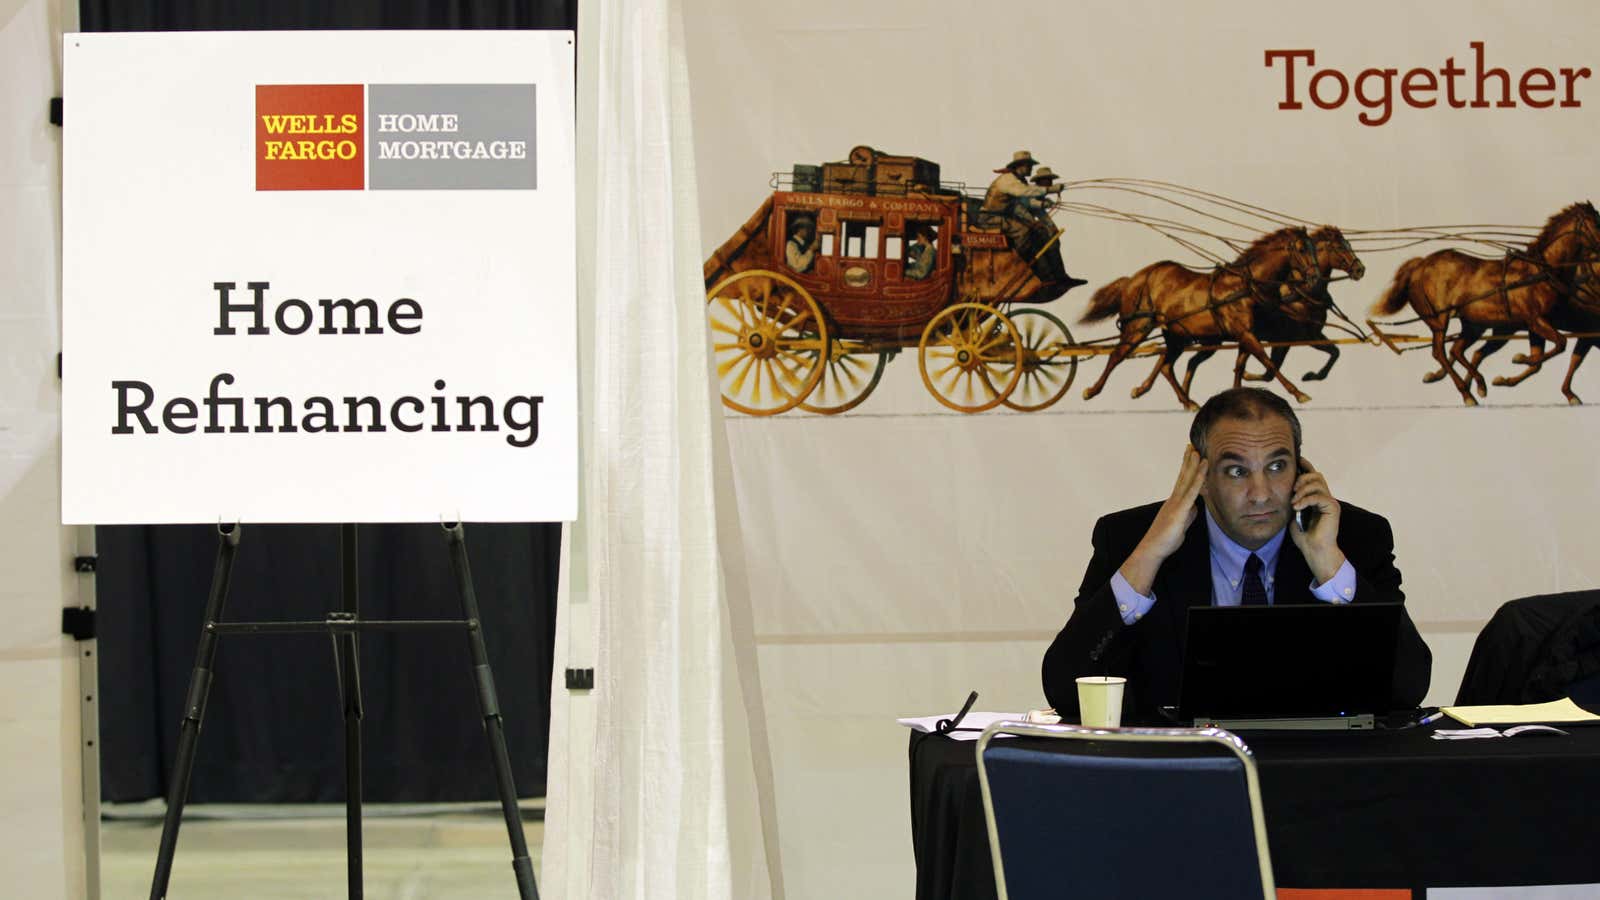 The refinancing boomlet is going the way of the stagecoach.